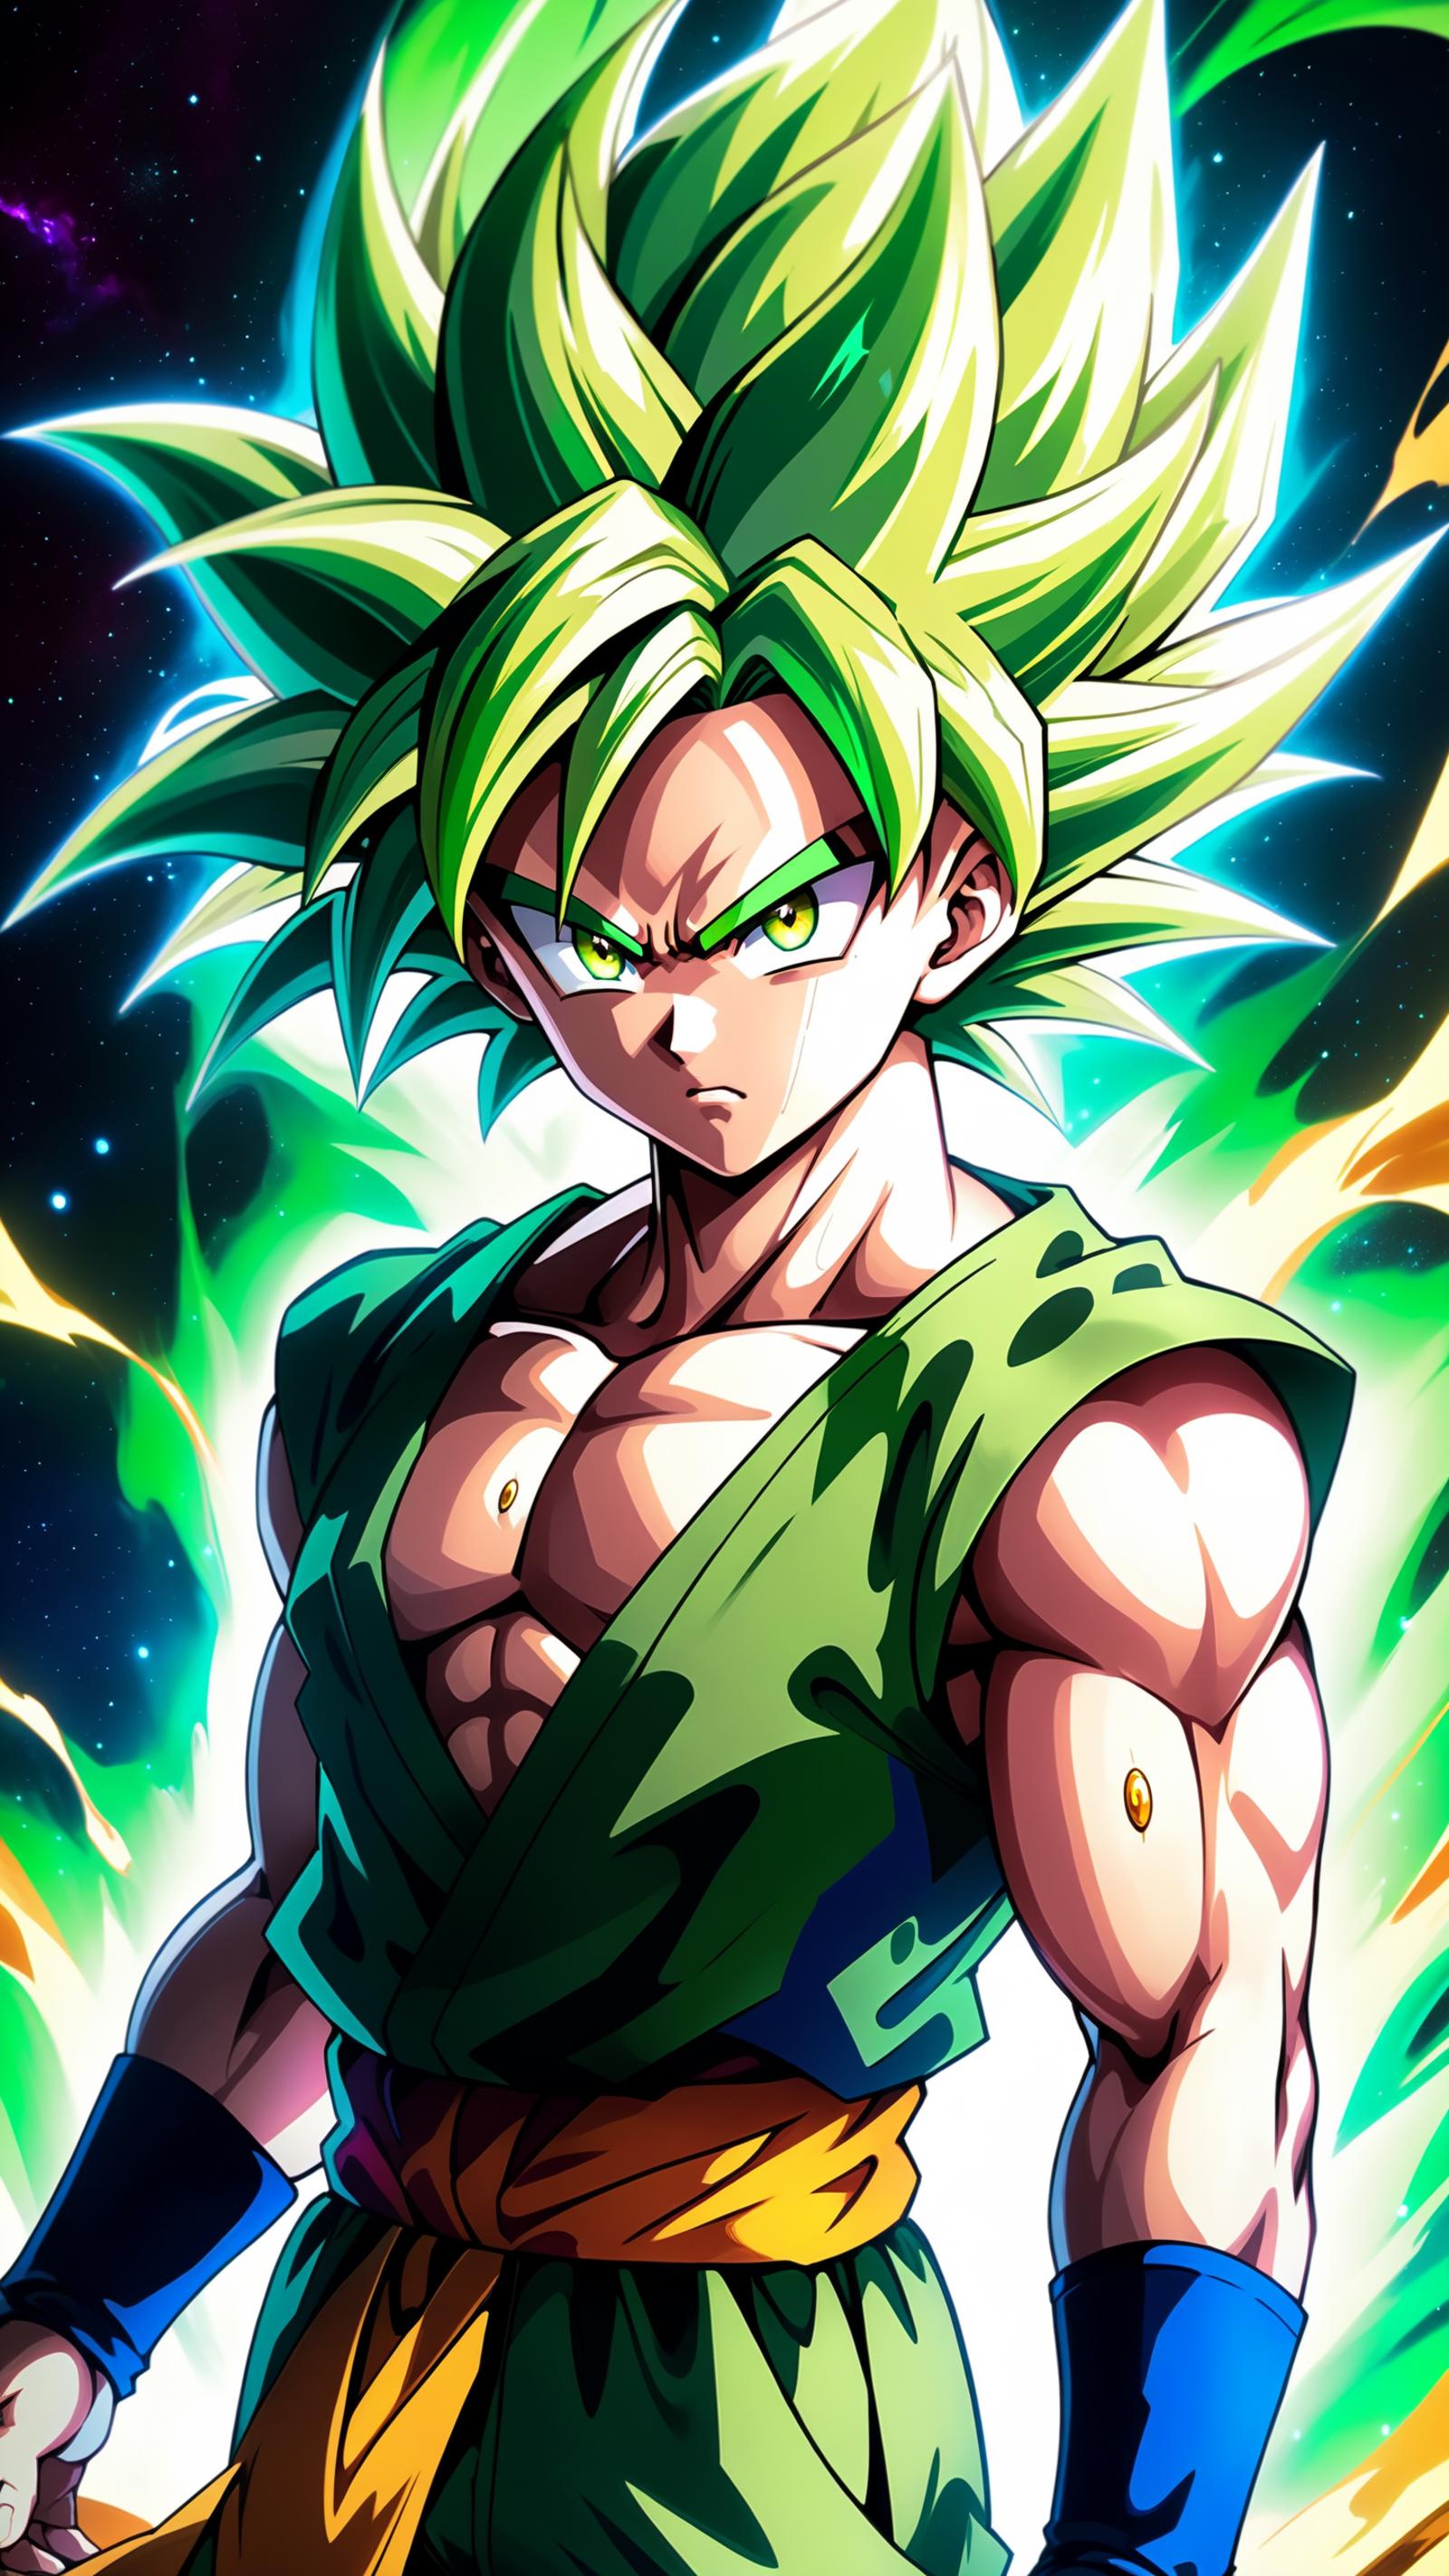 A comic book illustration of a shirtless, green-haired, muscular warrior with a green shirt and green eyes.